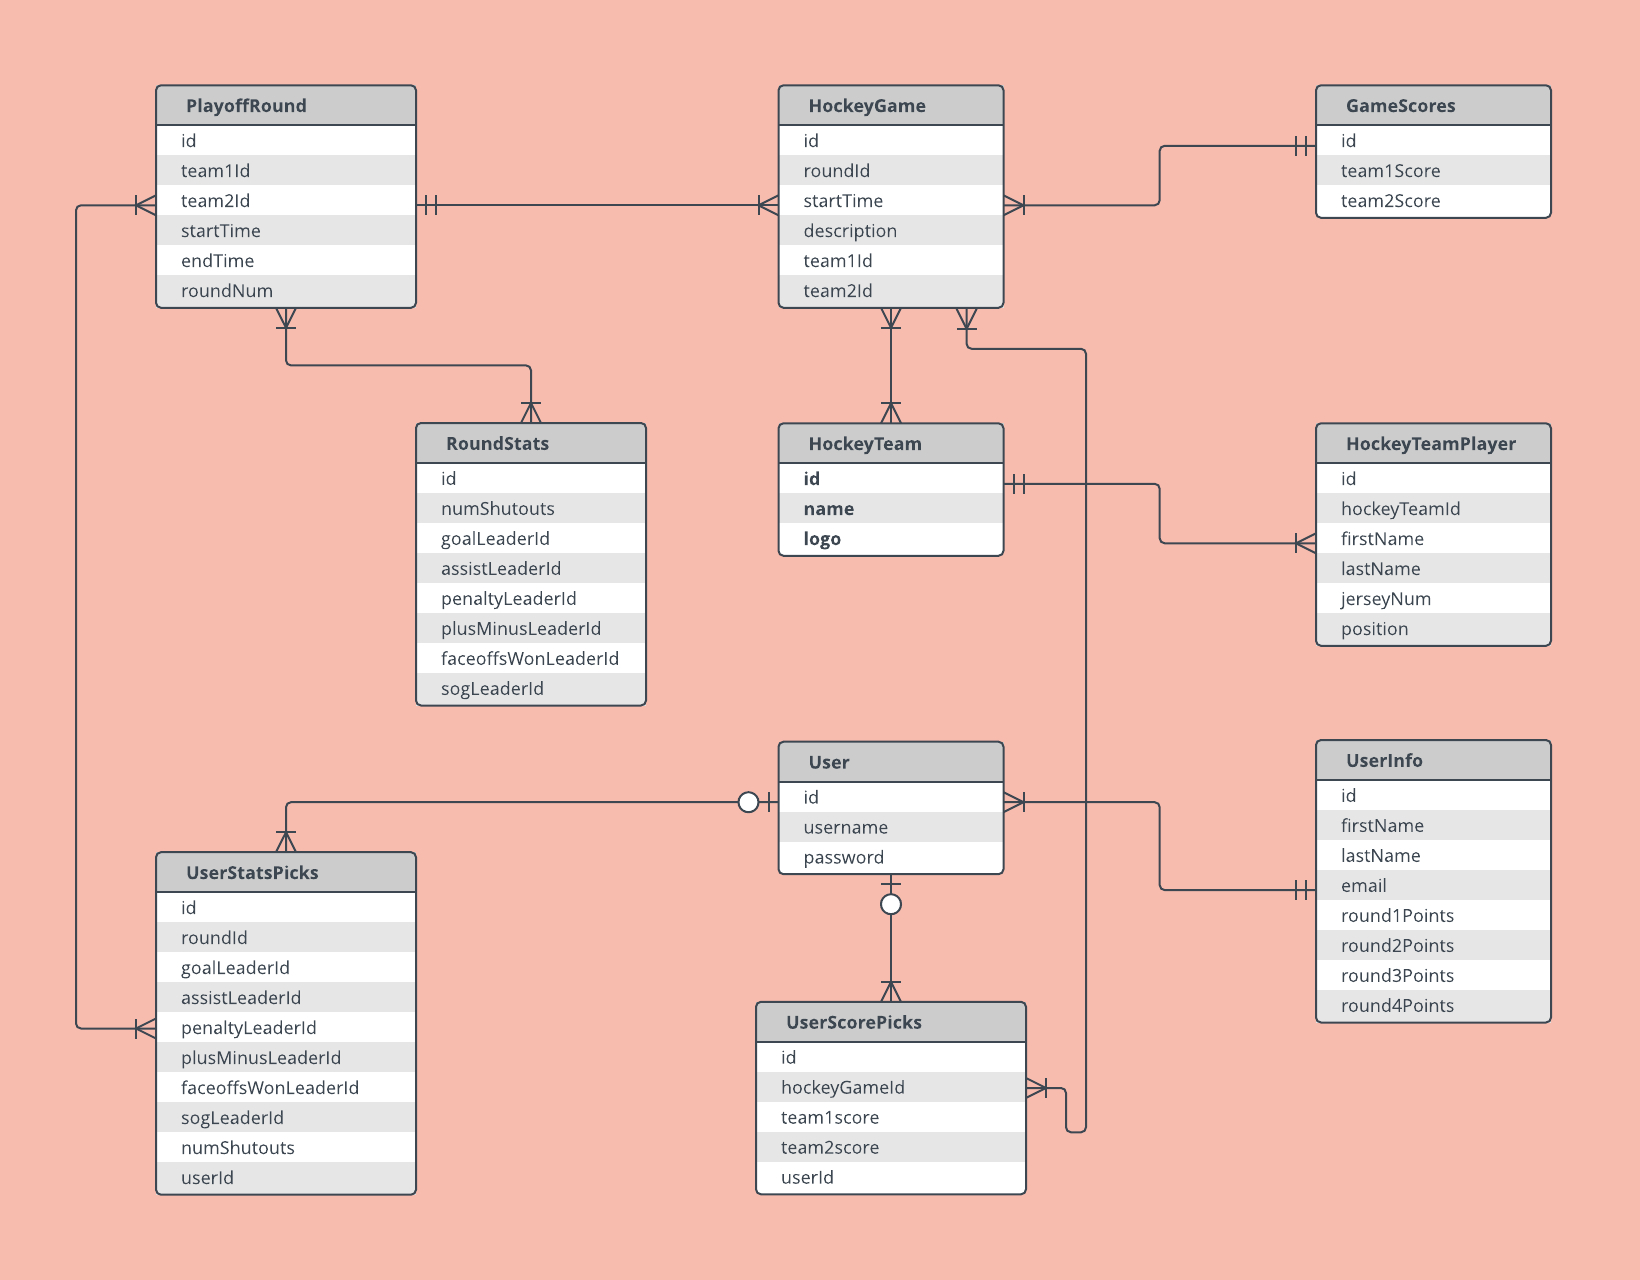 Er Diagram Examples And Templates | Lucidchart intended for Primary Key In Er Diagram Examples